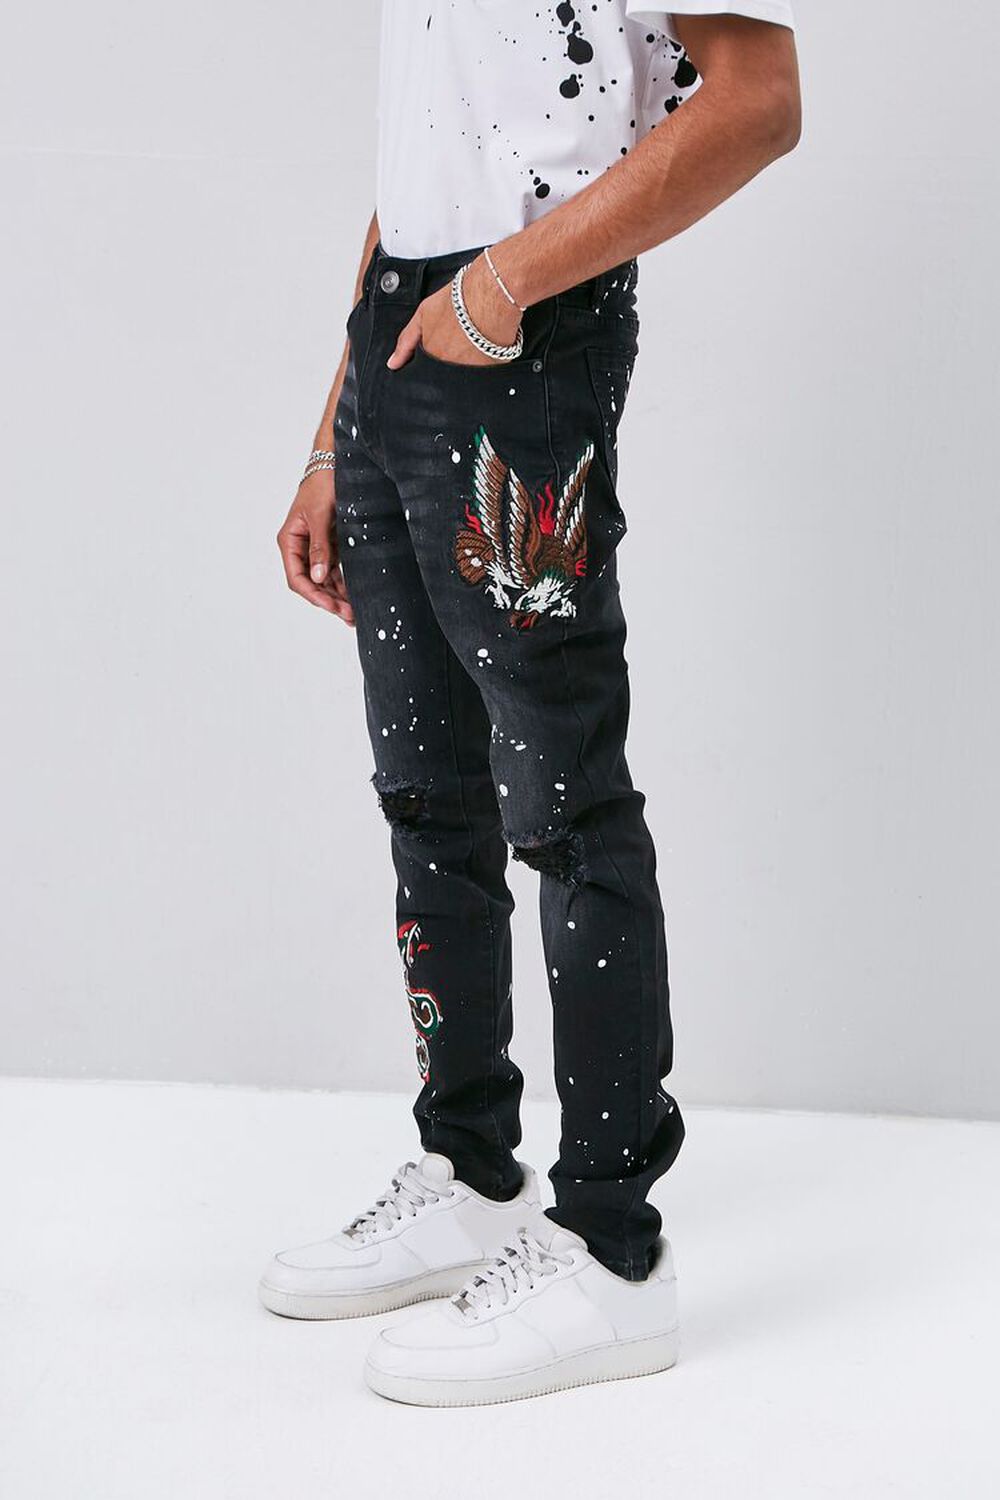 BLACK/MULTI Embroidered Graphic Paint Splatter Jeans, image 1